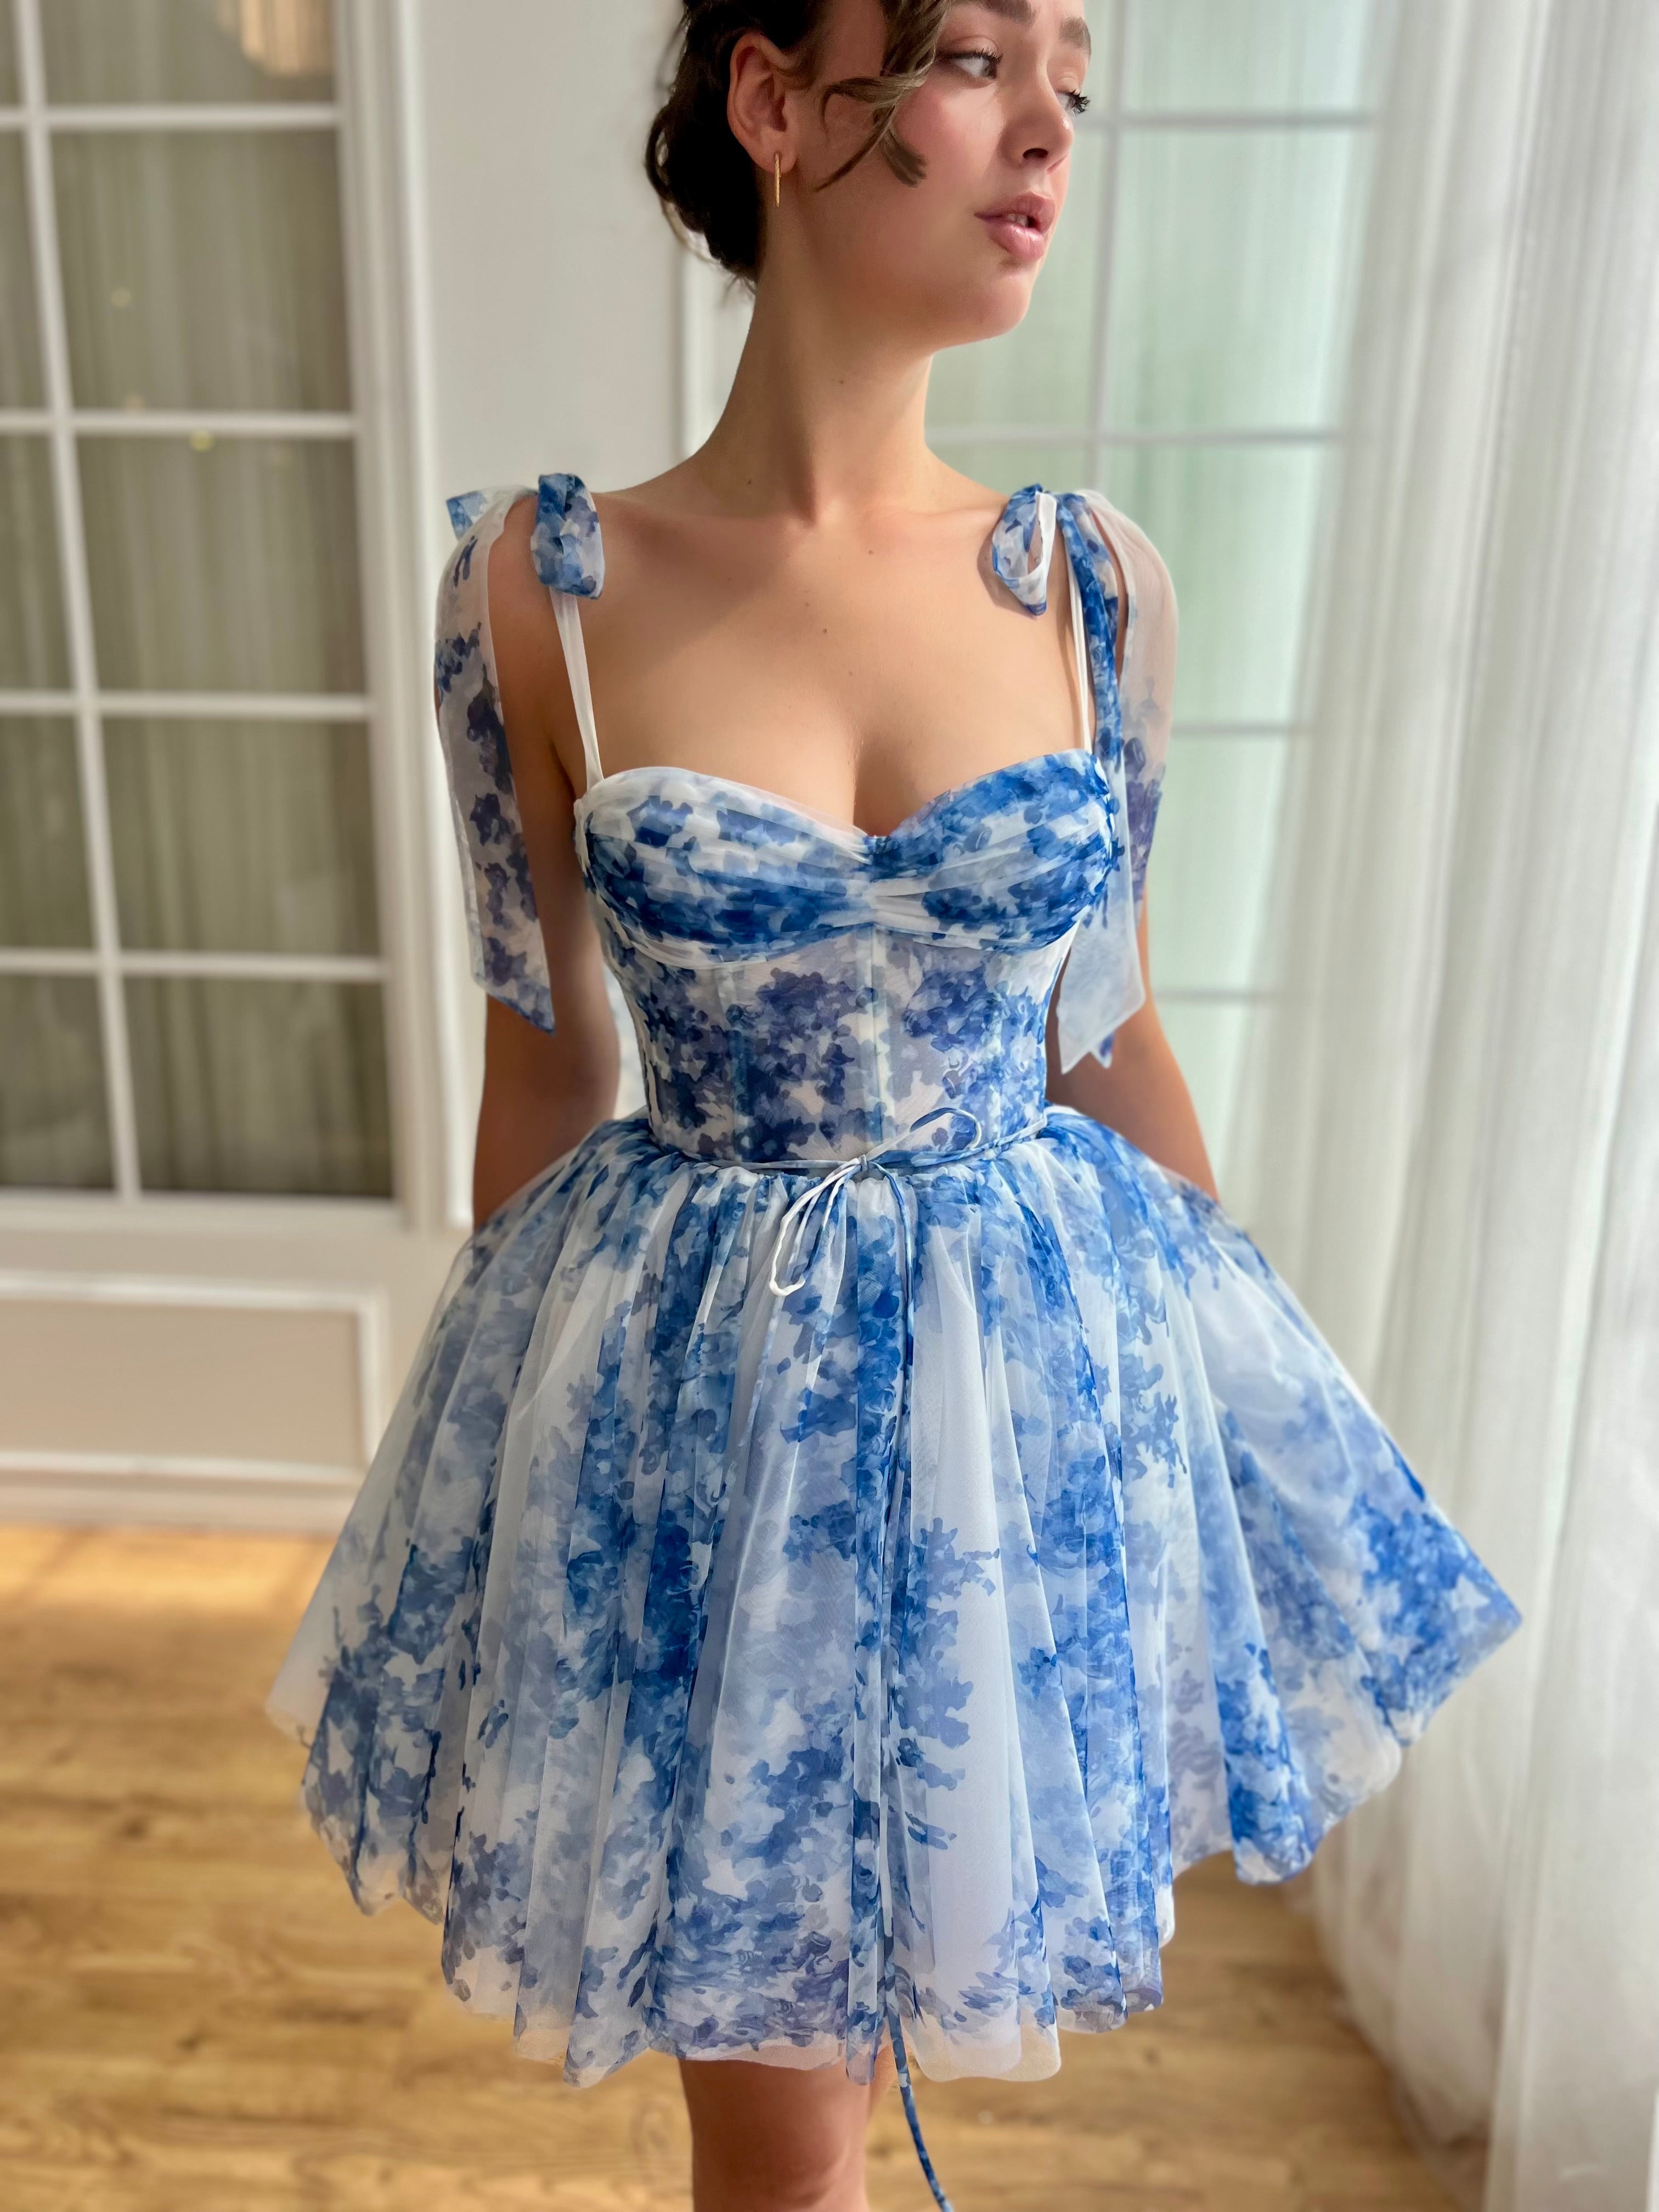 Blue mini dress with off the shoulder sleeves and printed floral design